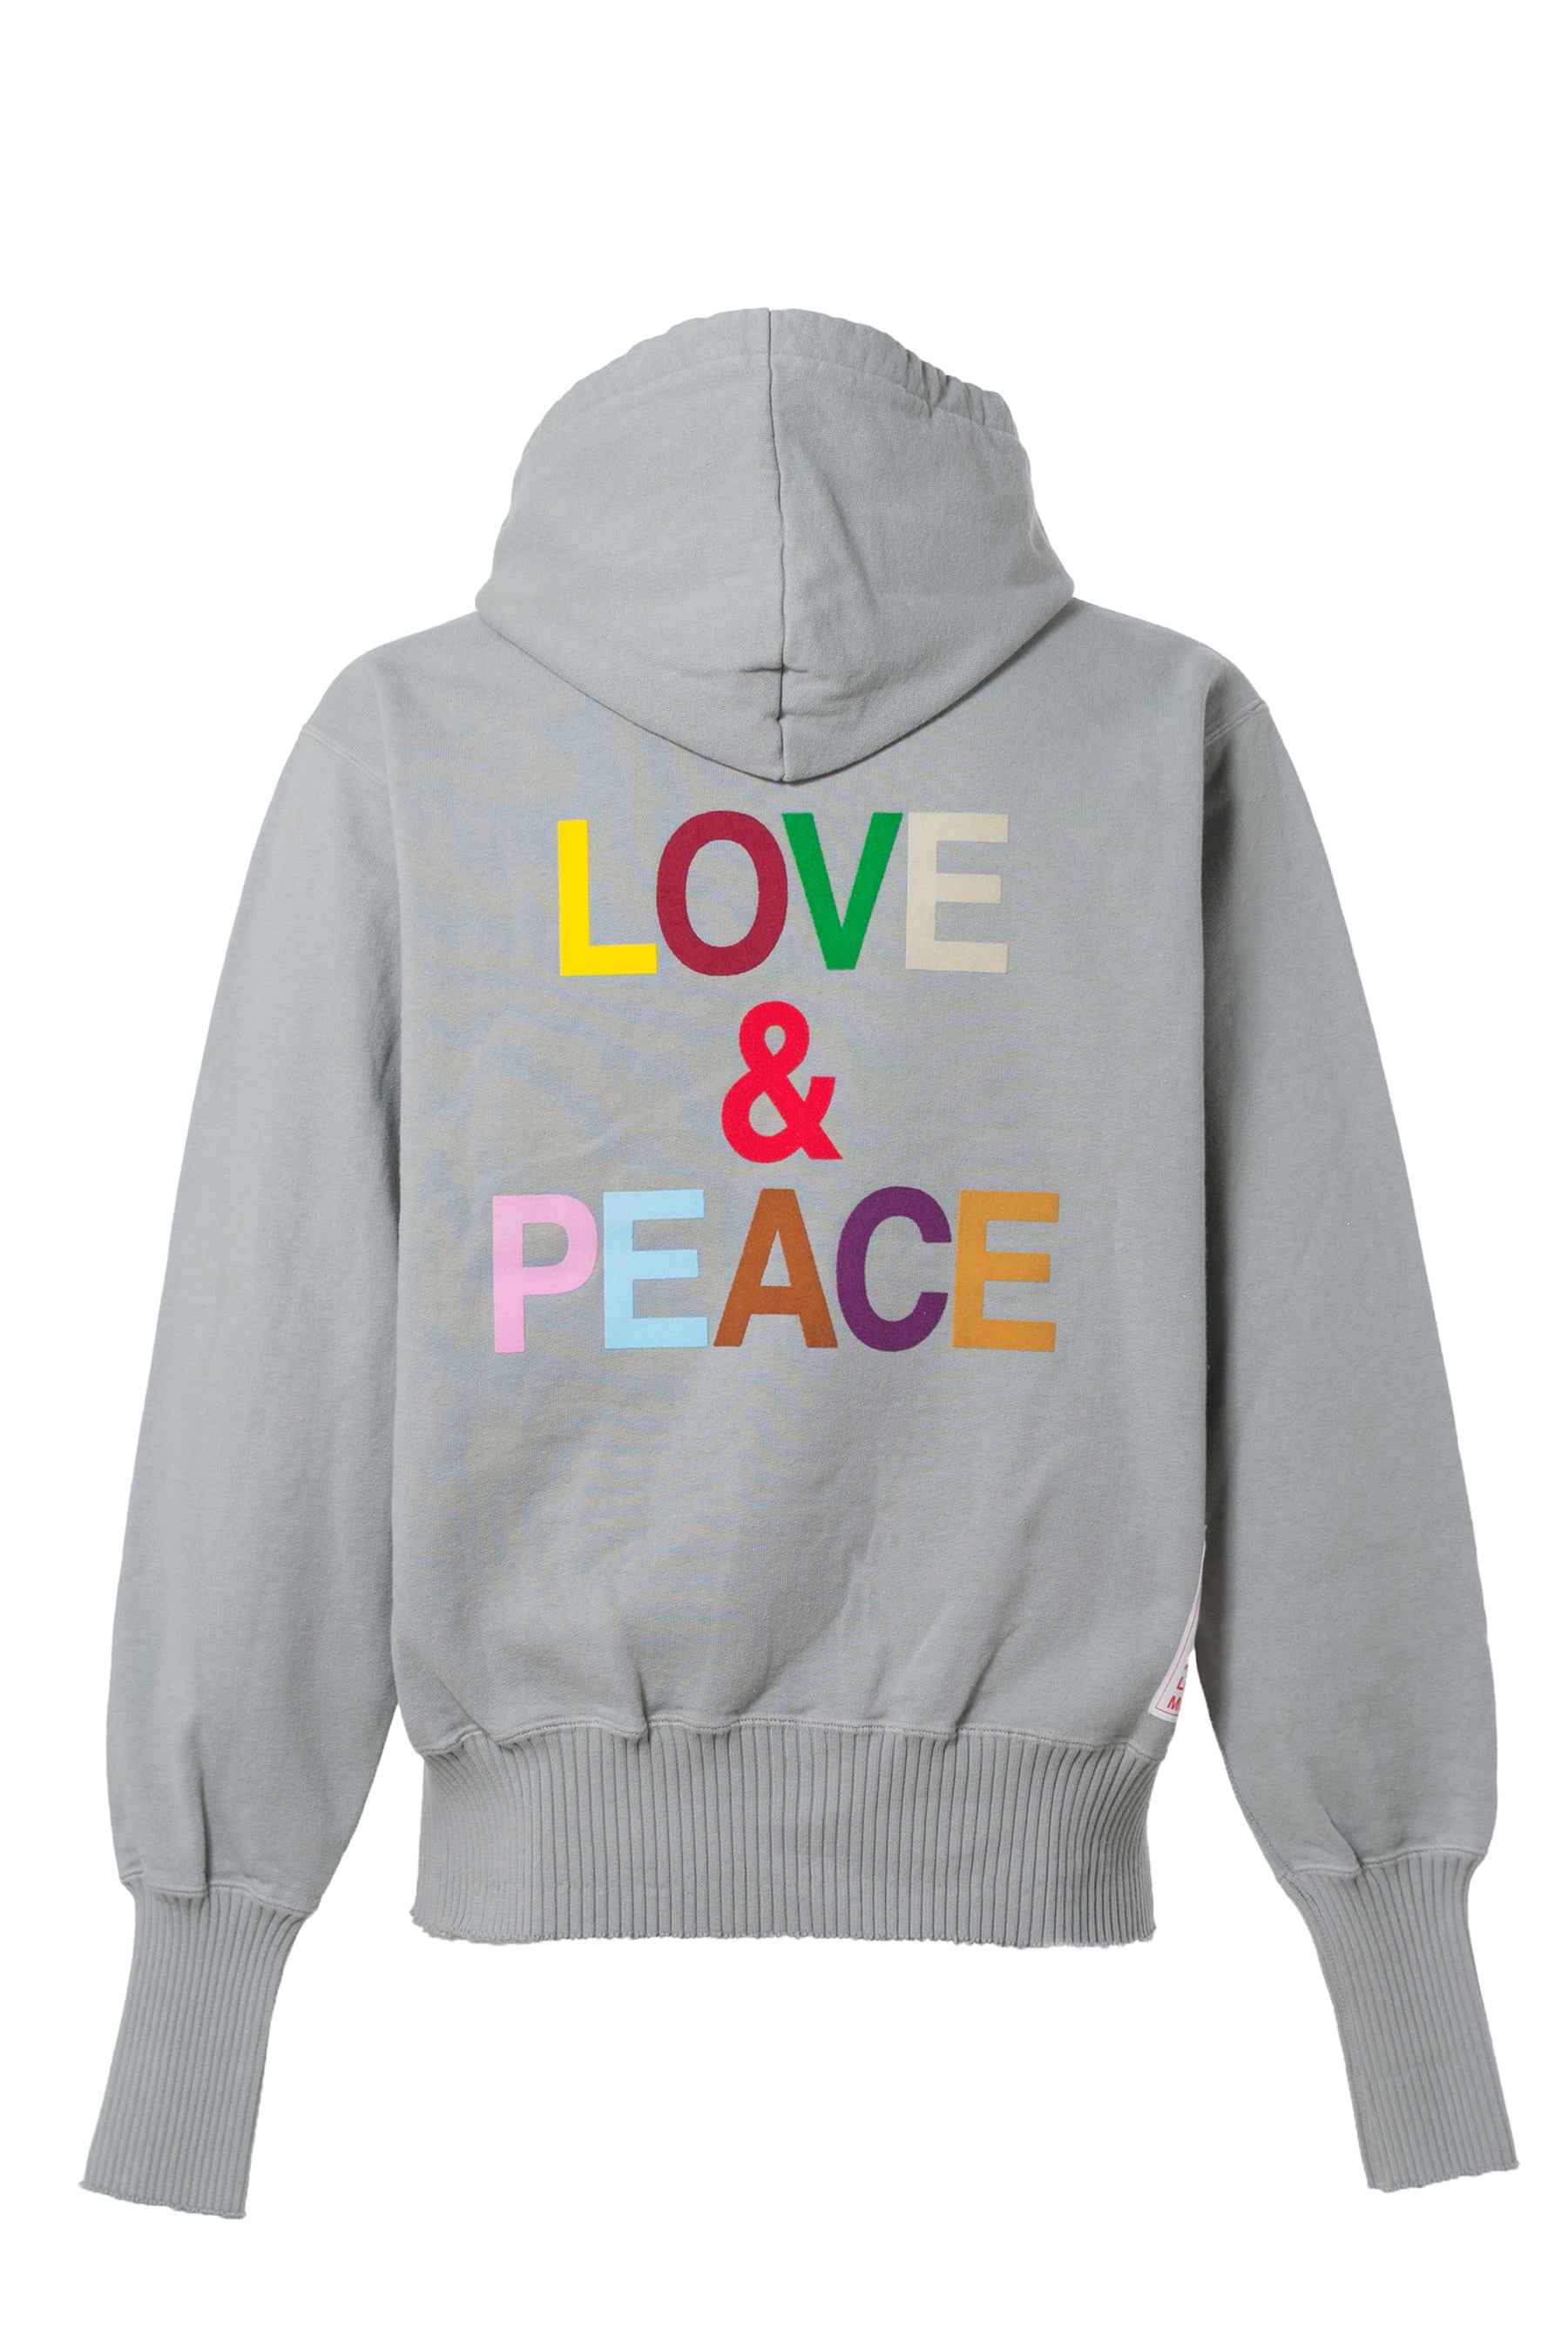 A LOVE MOVEMENT × Perfect ribs SS23 BASIC HOODIE 